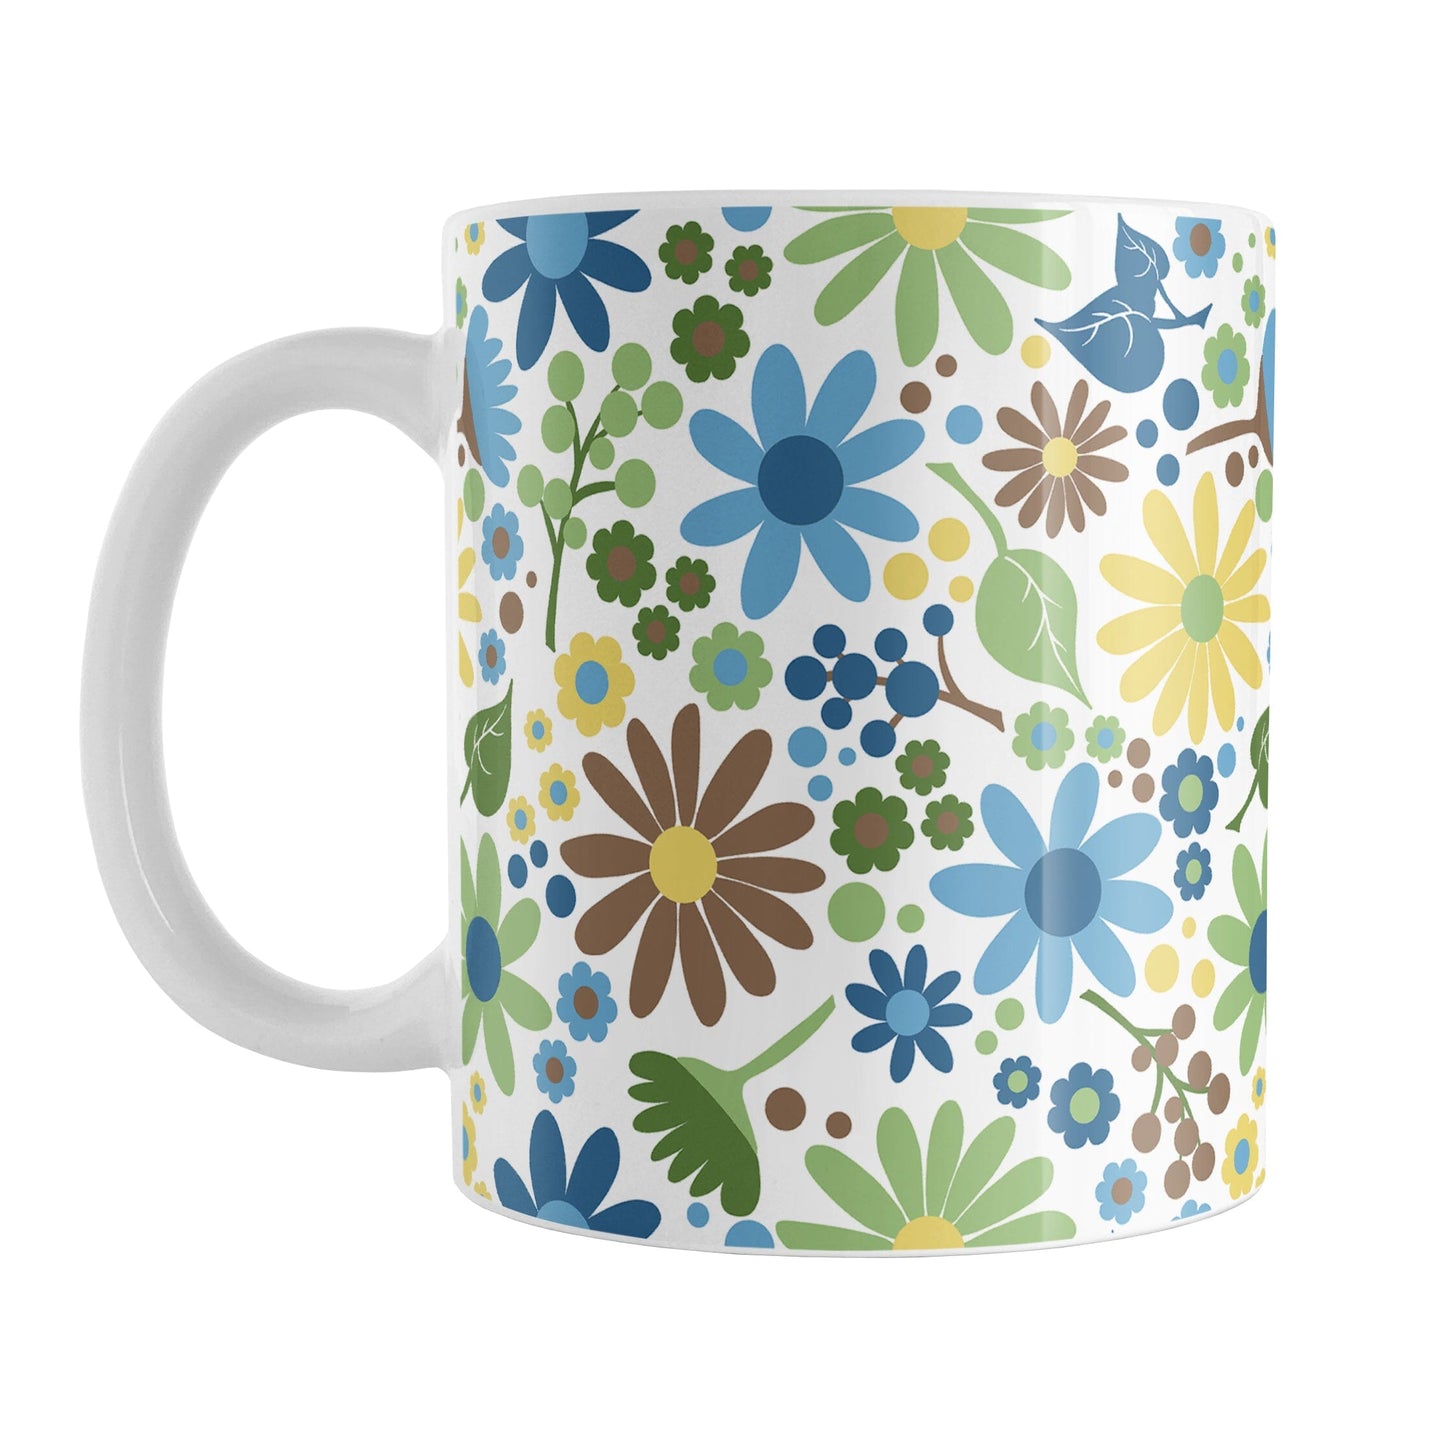 Sunny Summer Flowers Mug (11oz) at Amy's Coffee Mugs. A ceramic coffee mug designed with pretty floral wildflowers in a gorgeous summer color palette, with yellow, blue, green, and brown flowers and leaves in a pattern that wraps around the mug up to the handle.